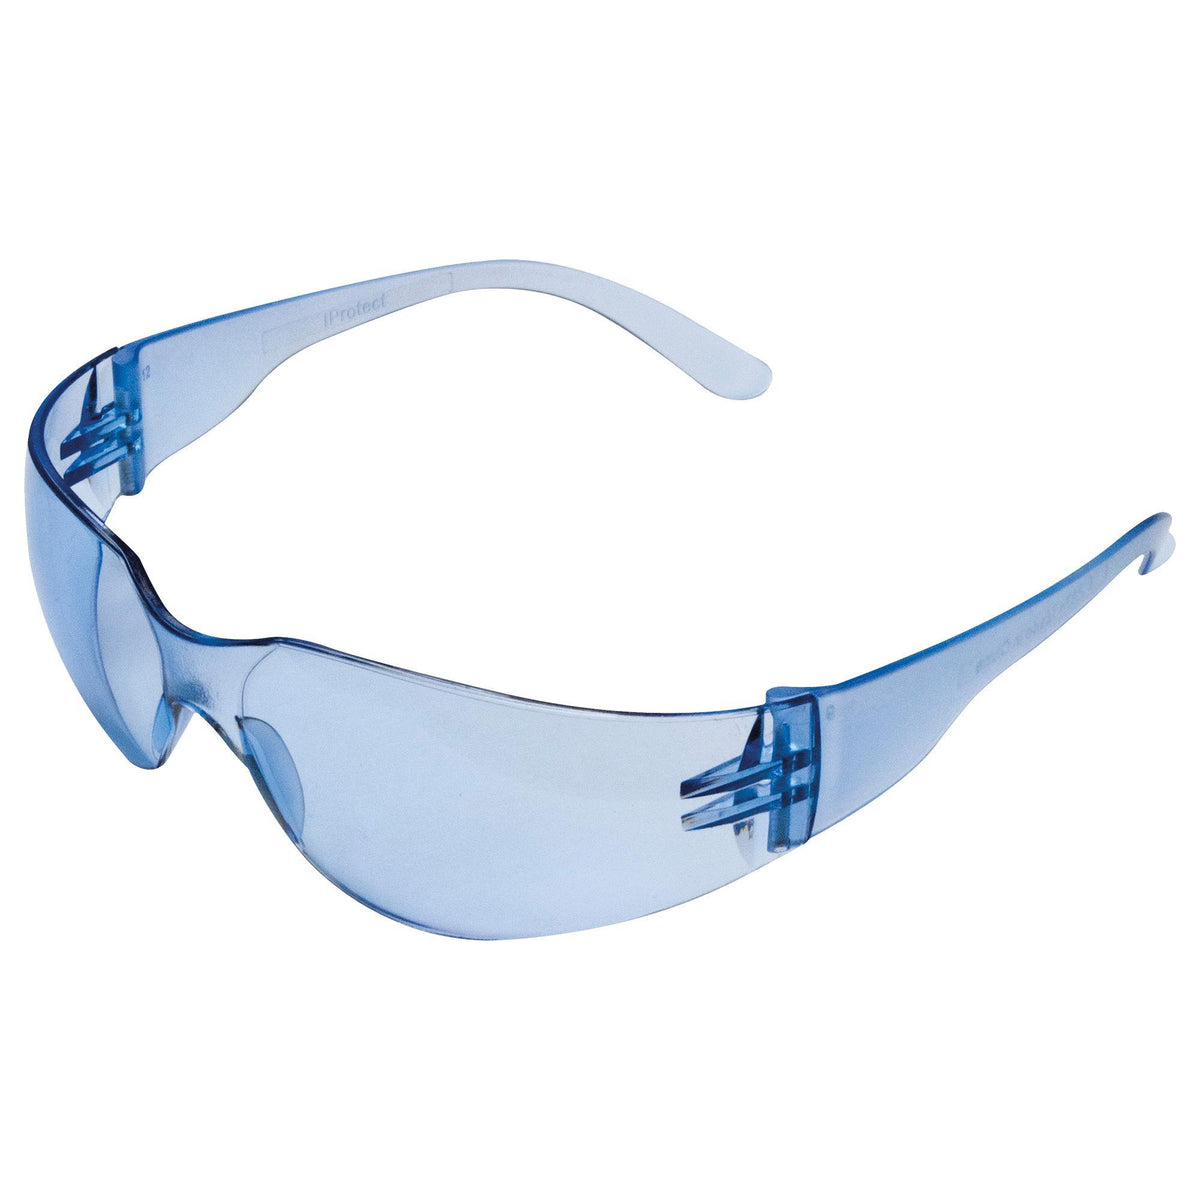 IPROTECT® Safety Glasses with Anti-Fog Lens 1PC